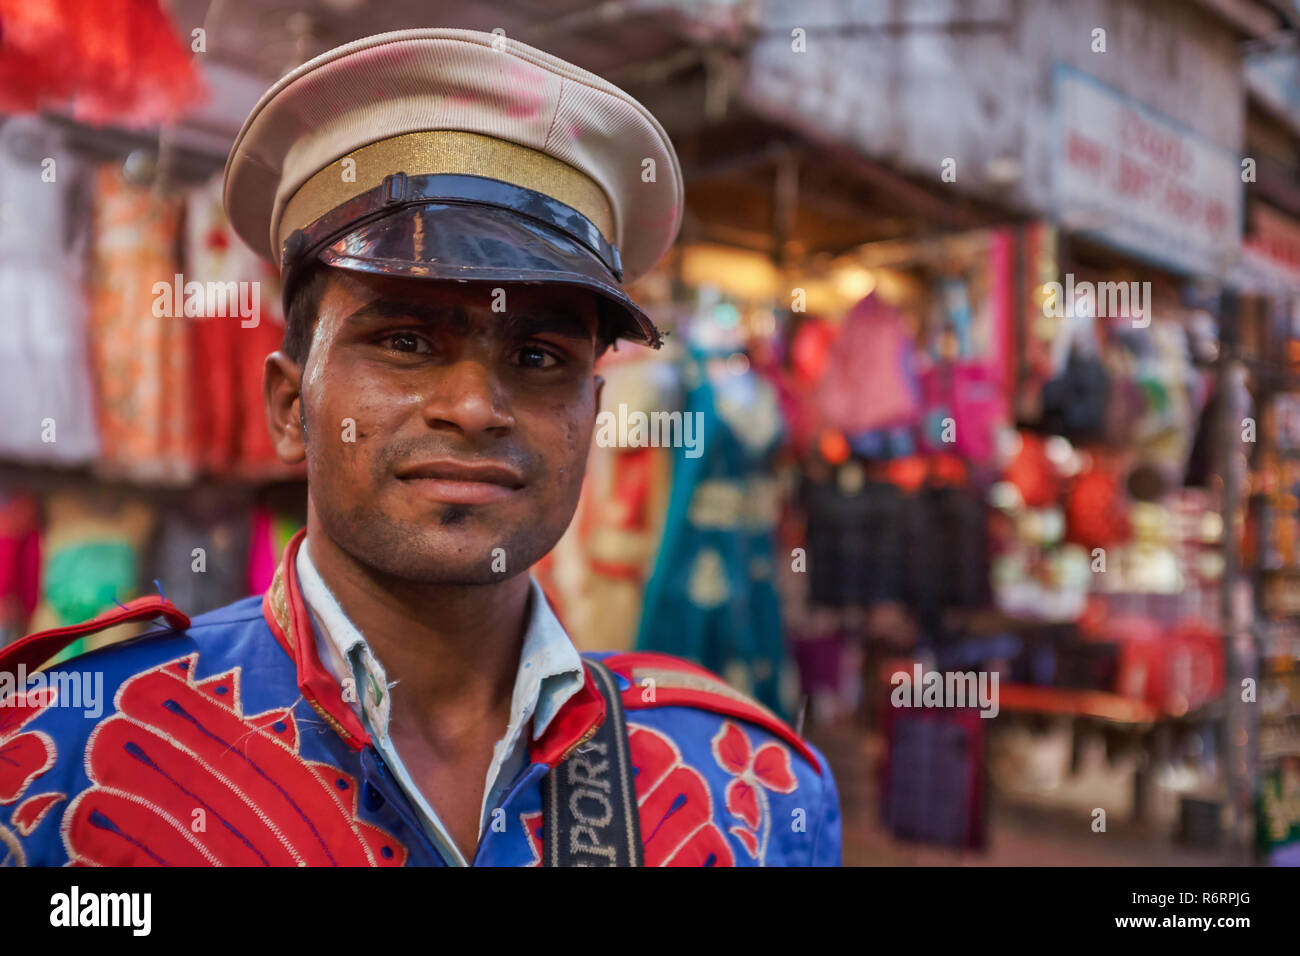 A uniformed member of a band of drummers in Mumbai, India, employed for religious celebrations and weddings Stock Photo